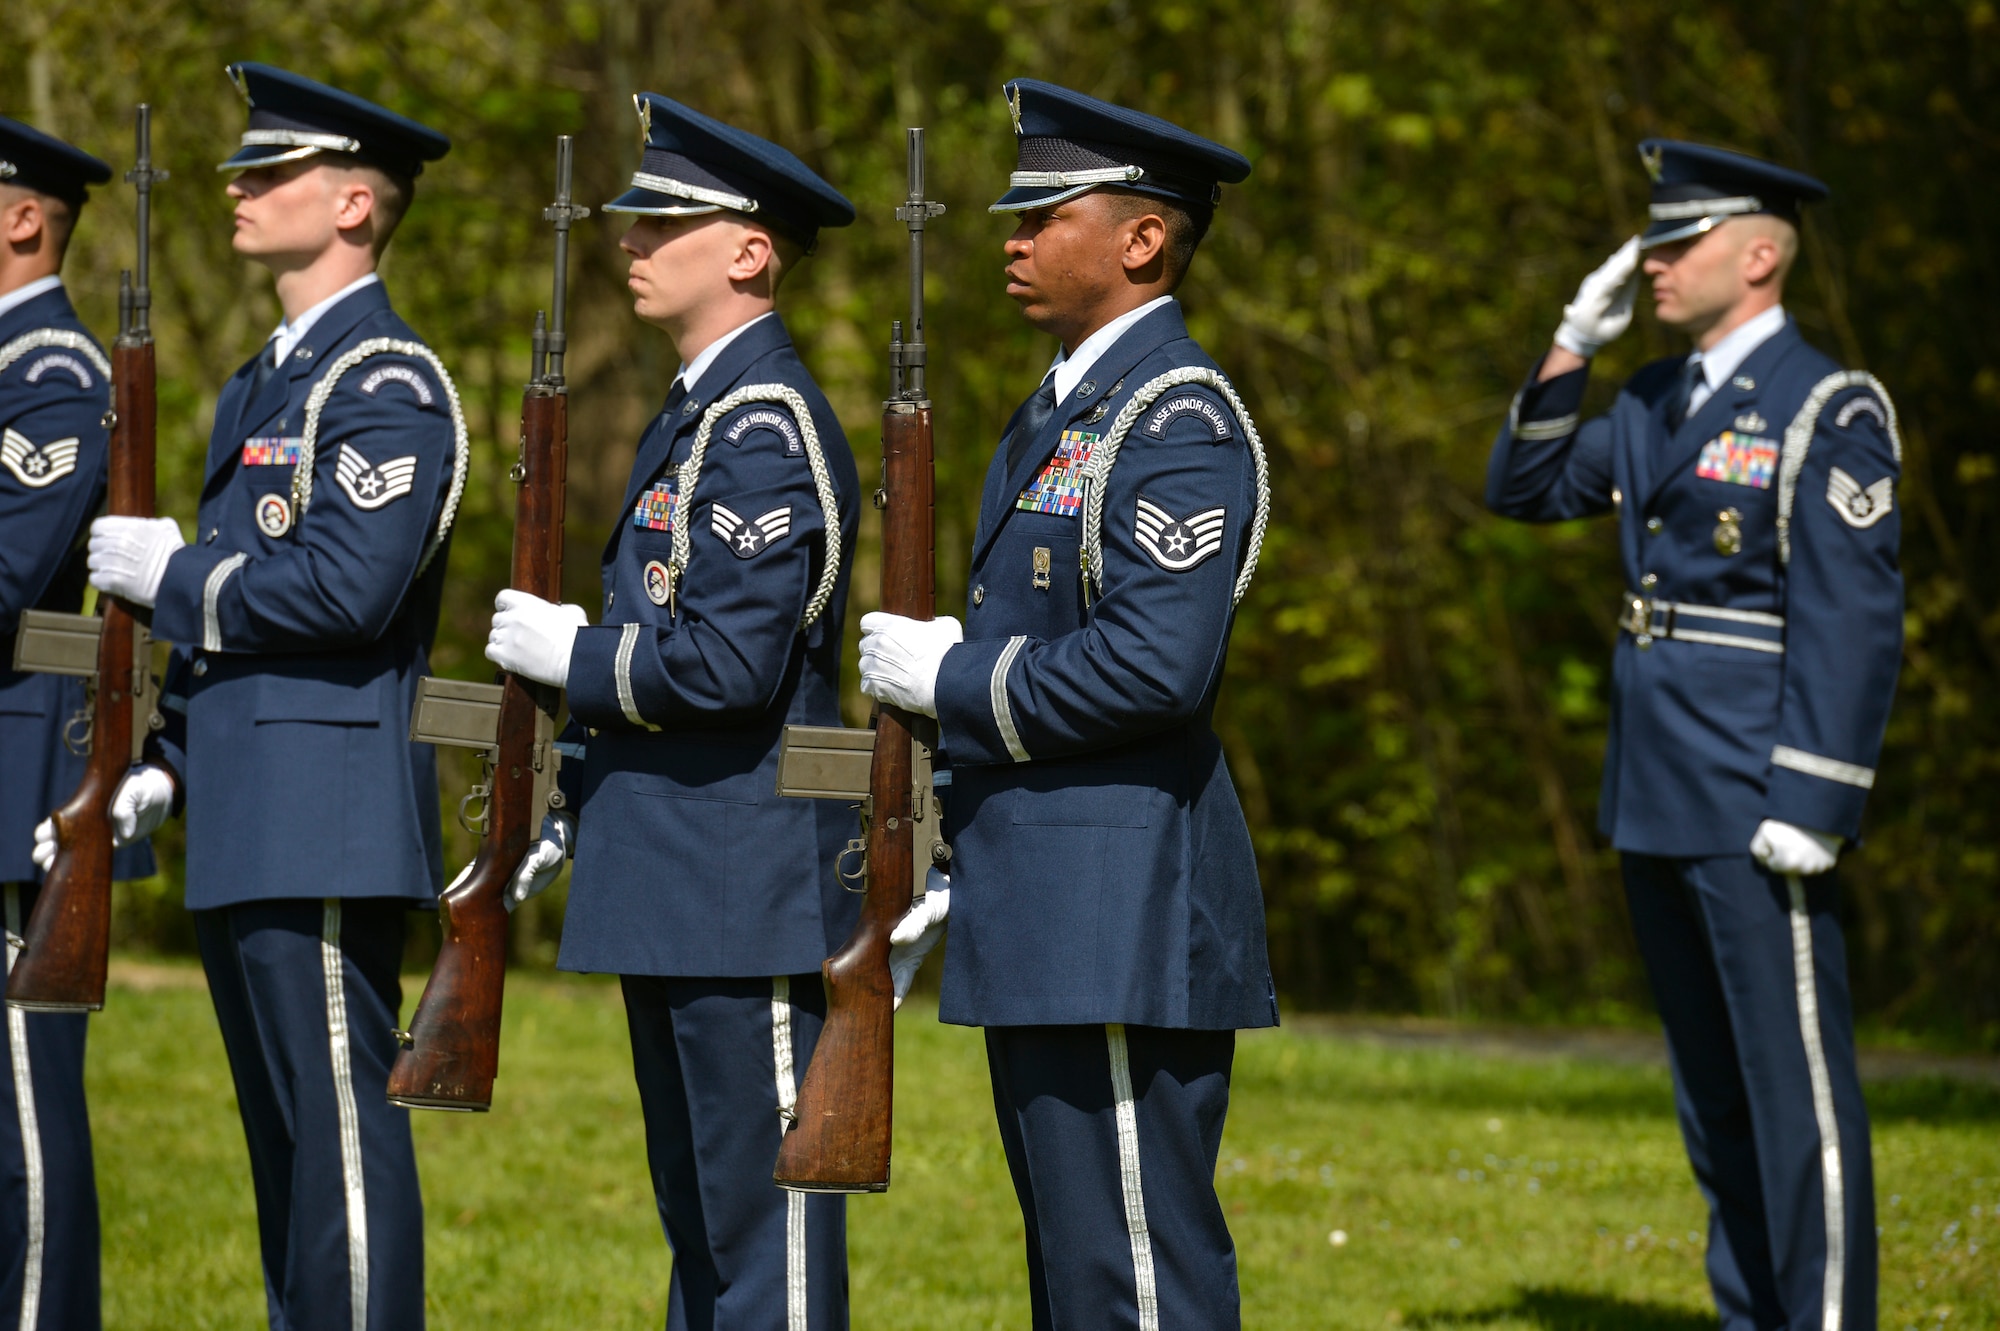 PARIS - A U.S. Air Force Honor Guard fire team from Spangdahlem Air Base, Germany, awaits the command to perform a 21-gun salute during the Lafayette Escadrille Memorial 100th anniversary ceremony in Marnes-la-Coquette, France, April 20, 2016. More than 200 Americans flew with France in the Lafayette Flying Corps prior to U.S. entry into World War I. Airmen from the USAF and their French counterparts, along with civilians from both countries, paid tribute to the men who served and the sacrifices of the 68 American airmen who died fighting with the French in World War I. The memorial highlights the 238-year alliance between the U.S. and France with their long history of shared values and sacrifice. (U.S. Air Force Photo by Tech. Sgt. Joshua DeMotts/Released)